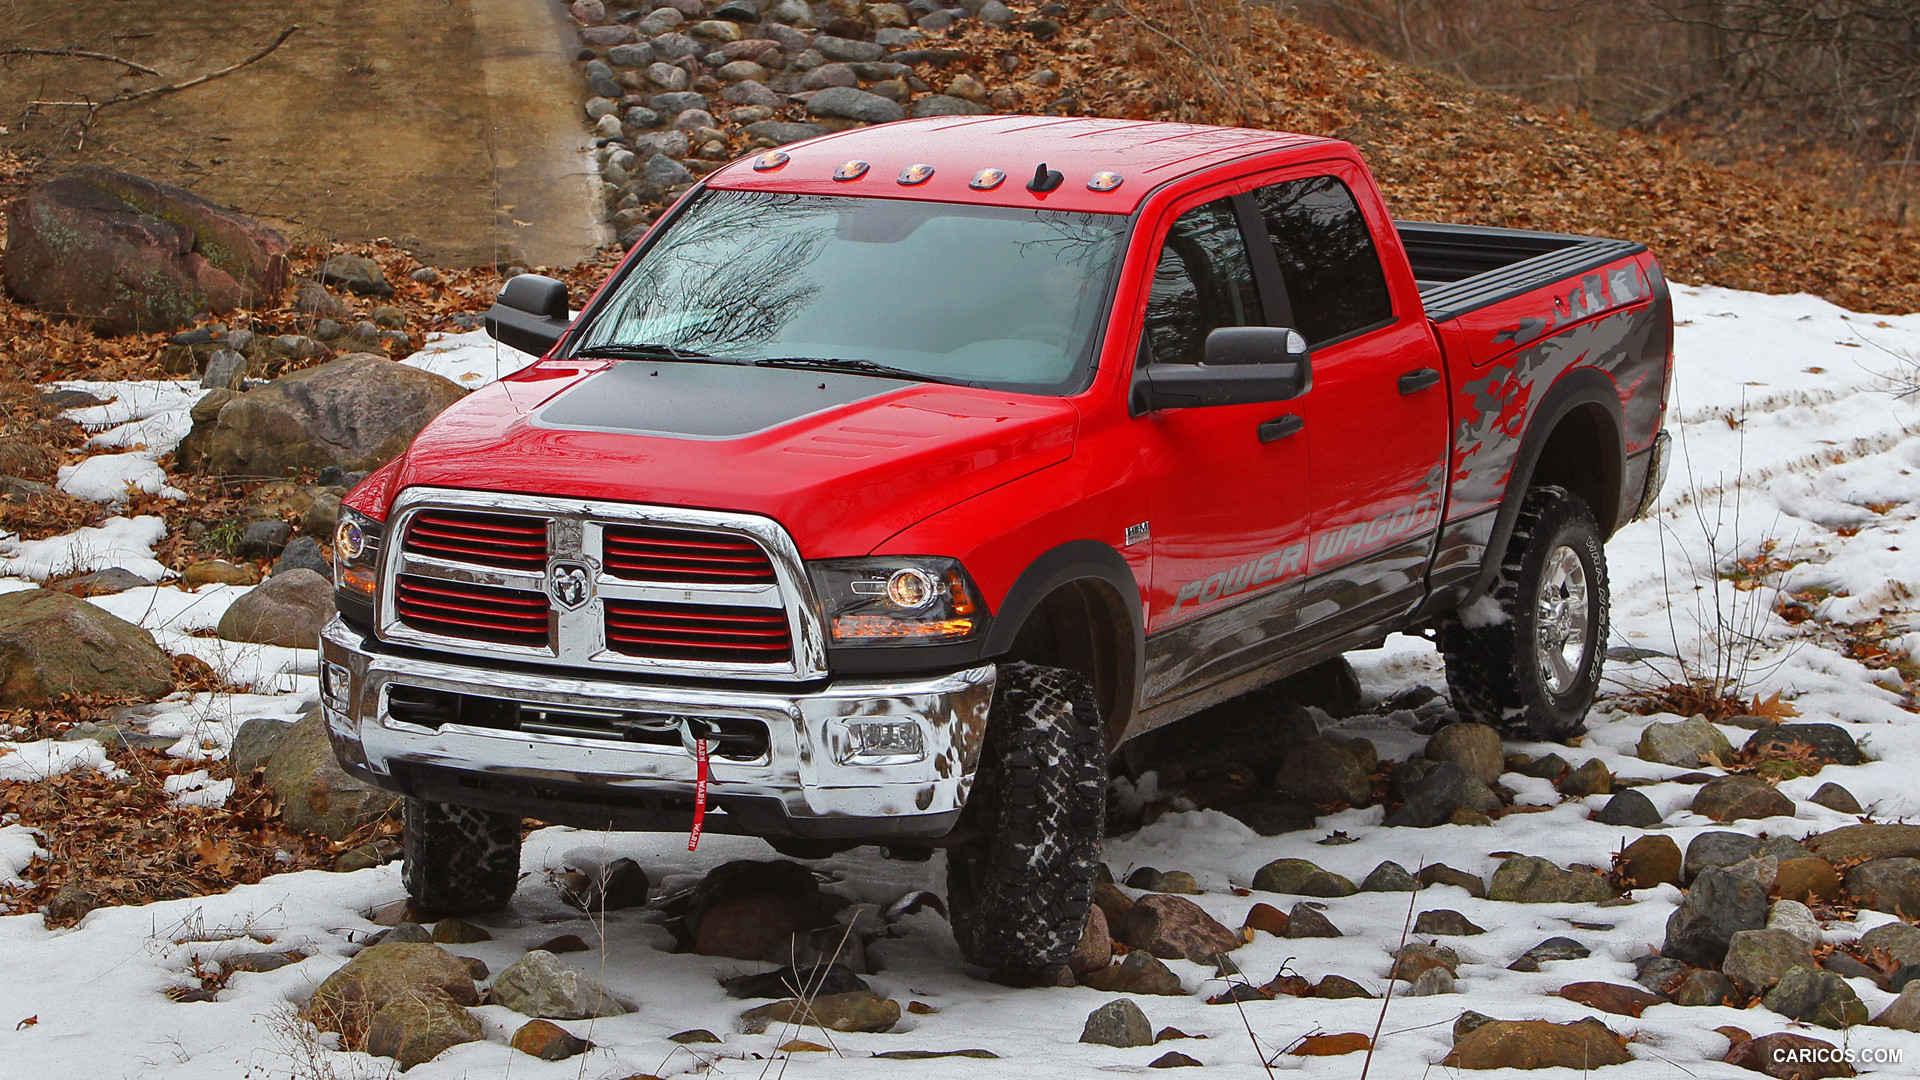 Amazing 2014 Ram Heavy Duty Power Wagon Pictures & Backgrounds